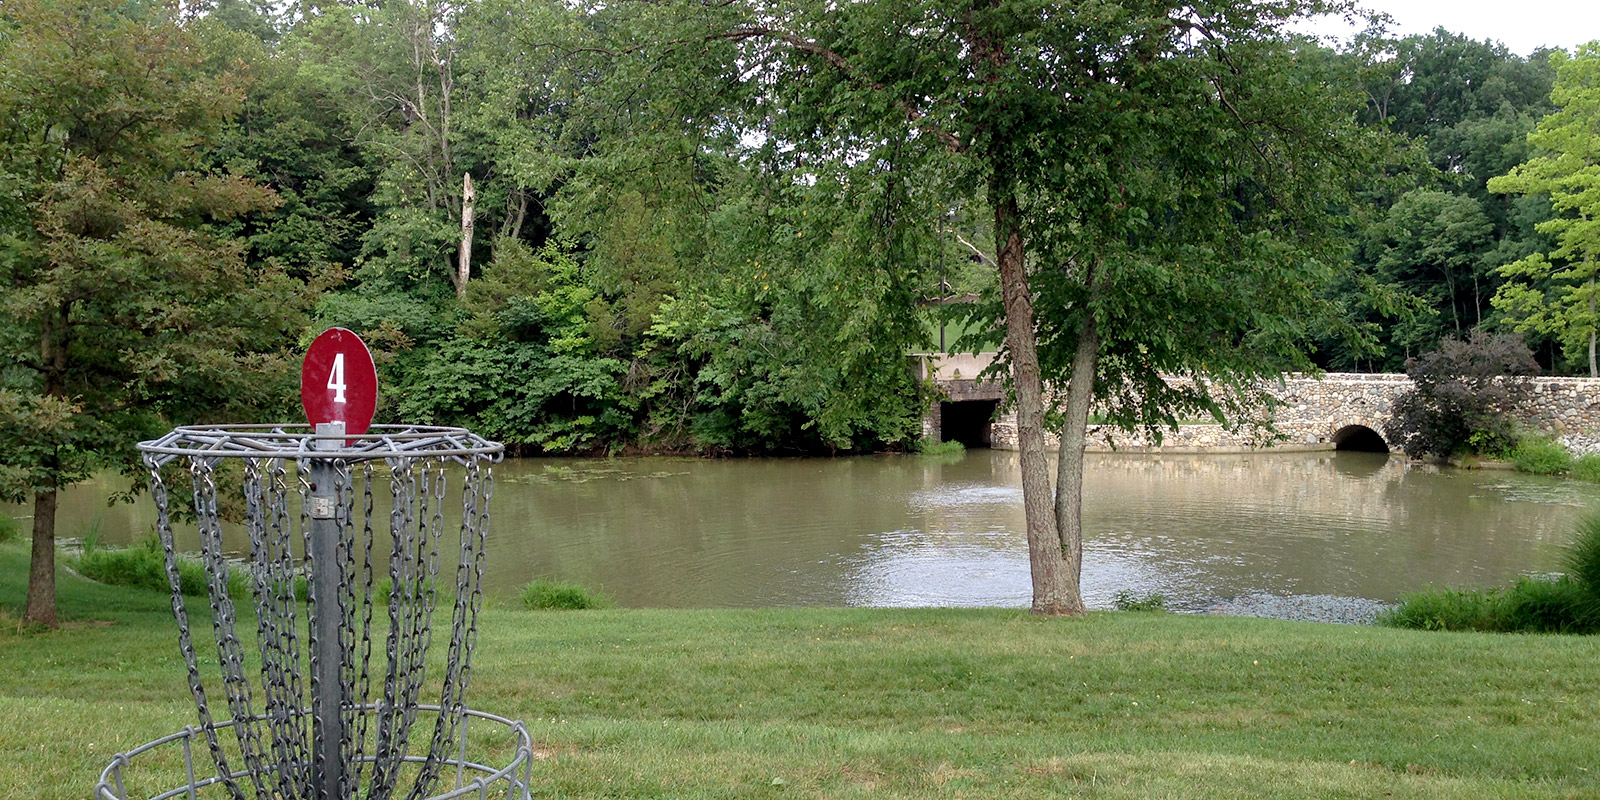 disc golf basket in front of a pond